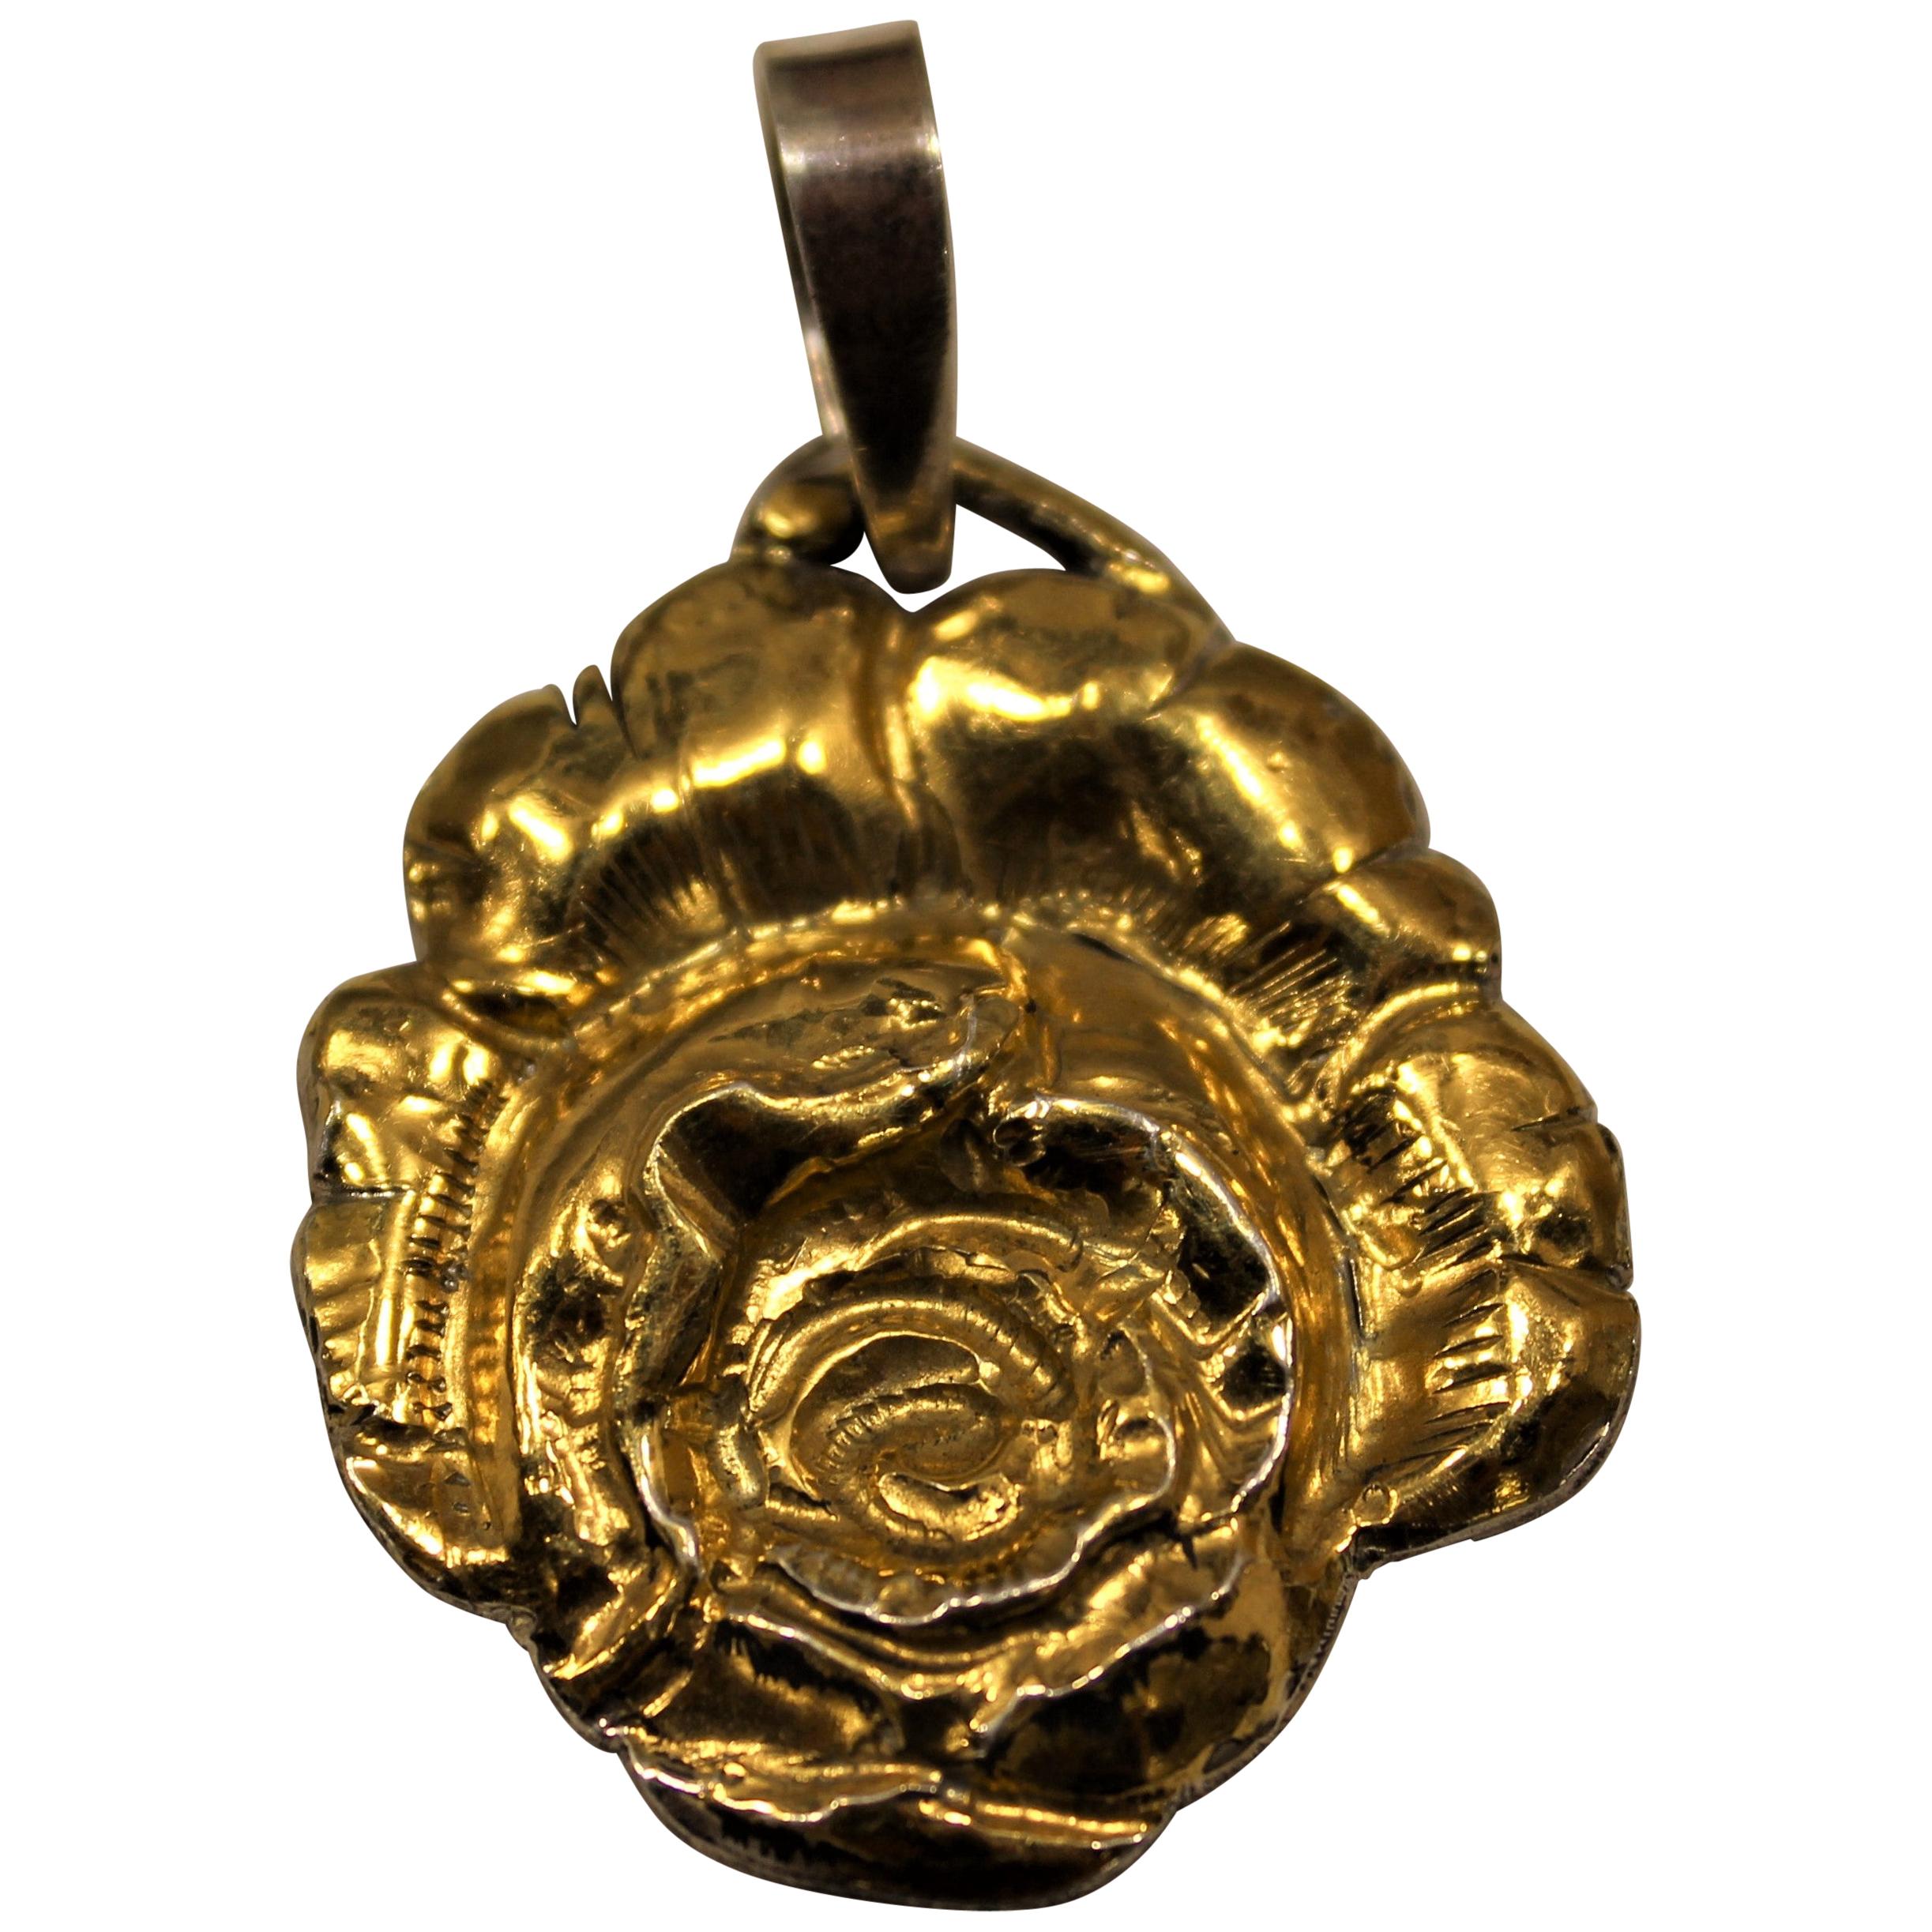 24 Karat Gold, Solid Silver, Pendant, Rose, Handcrafted, Italy